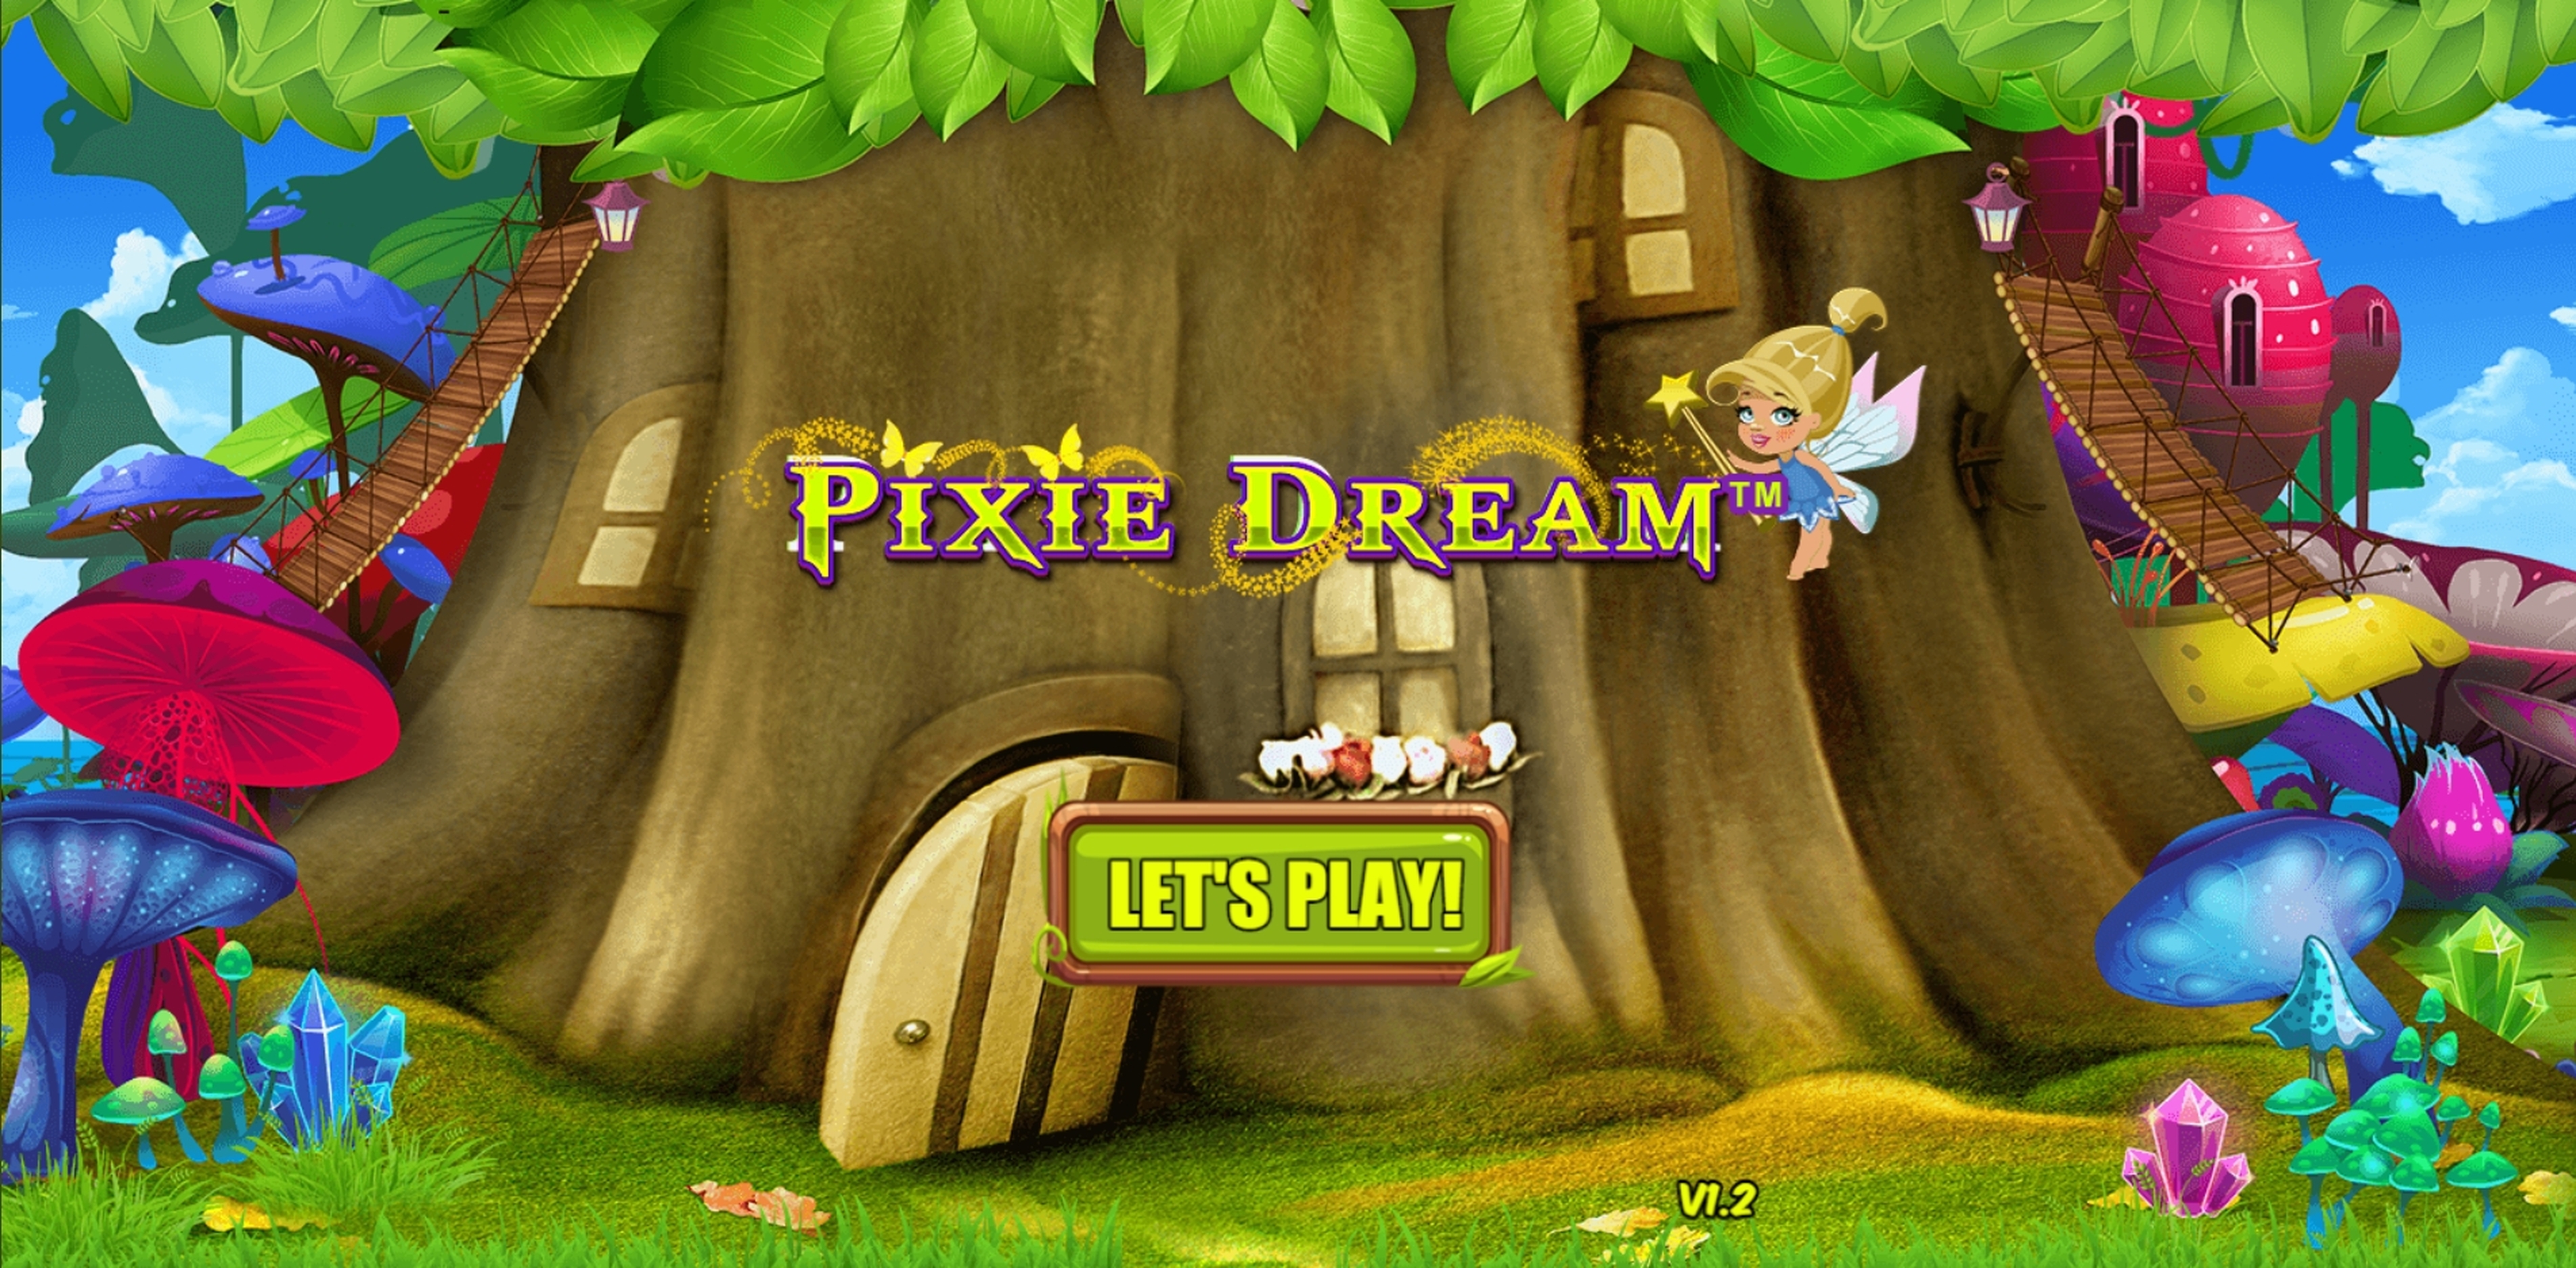 Play Pixie Dream Free Casino Slot Game by Allbet Gaming